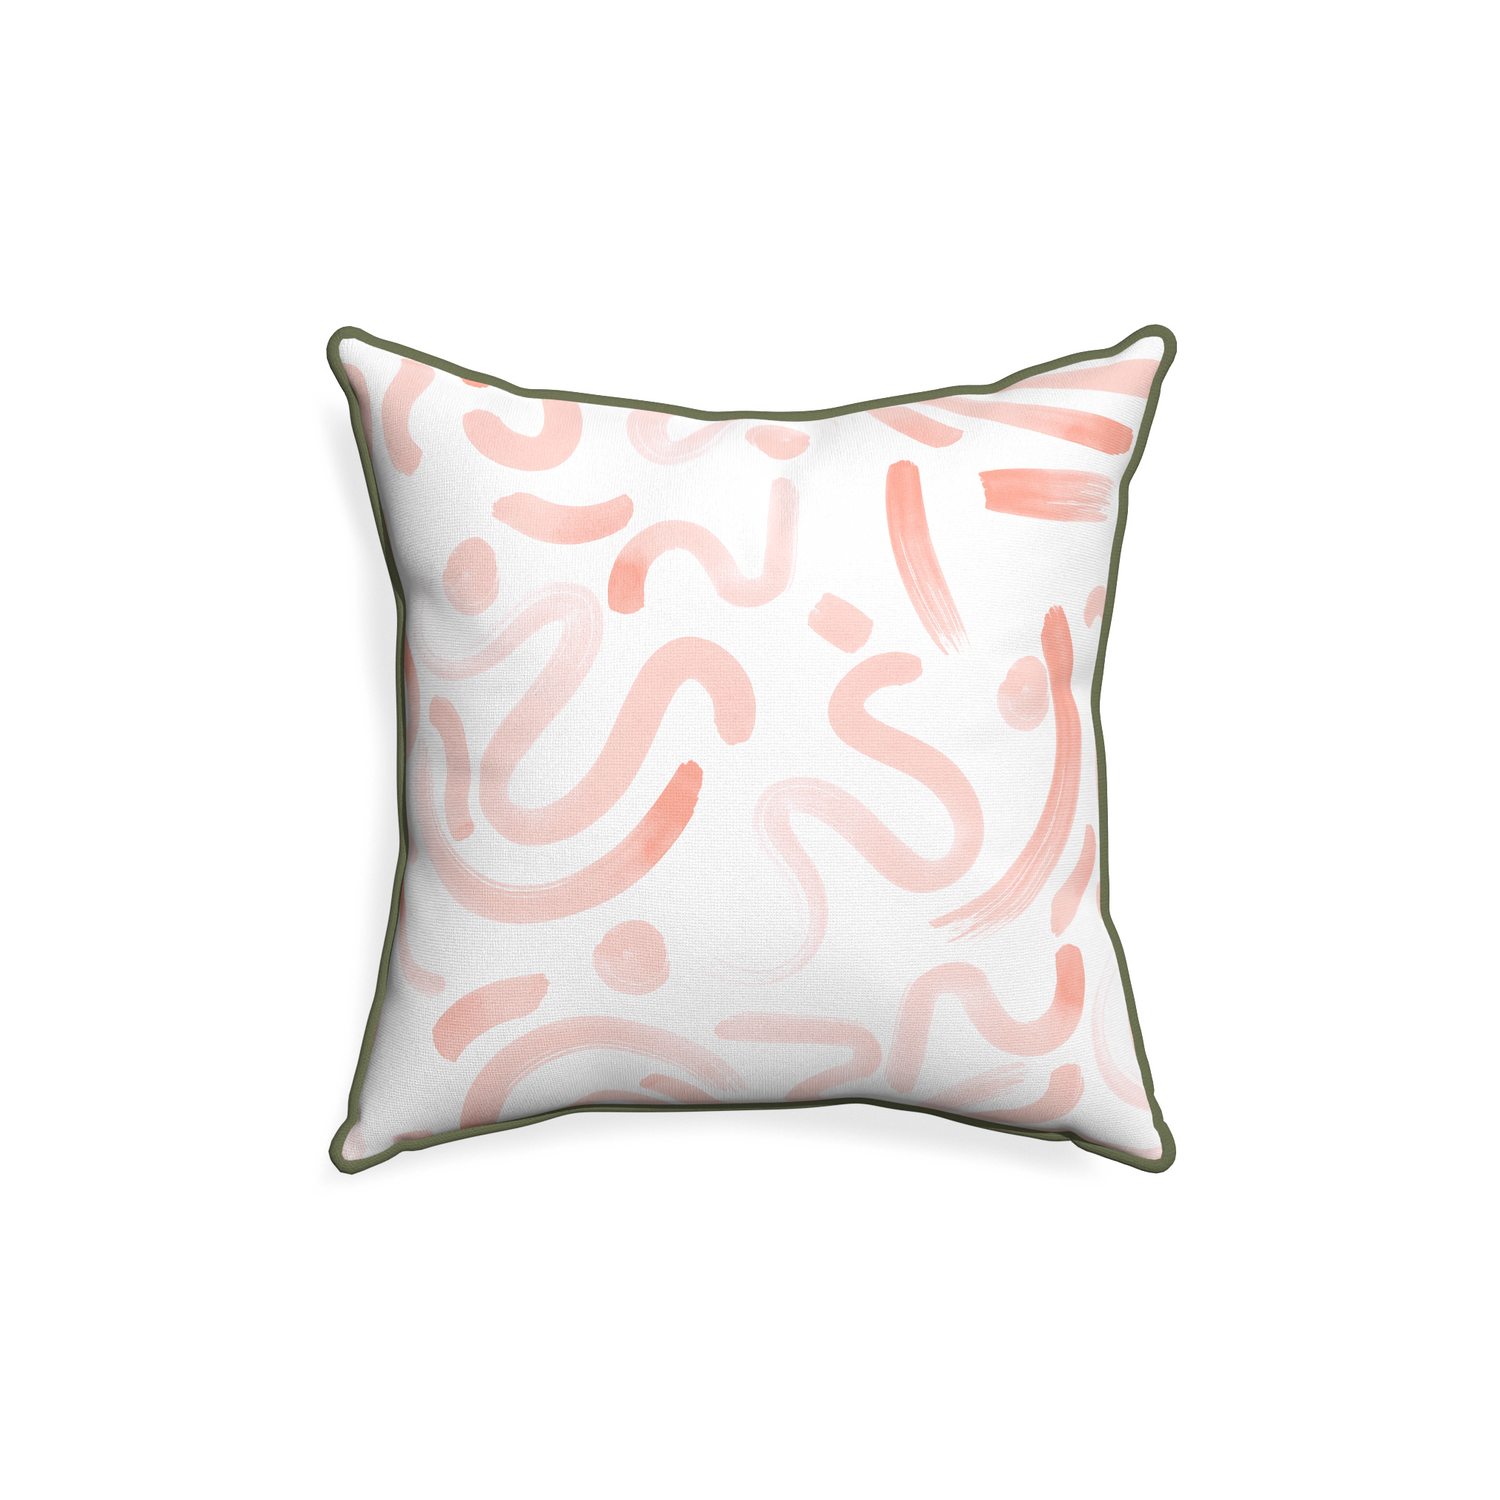 18-square hockney pink custom pink graphicpillow with f piping on white background